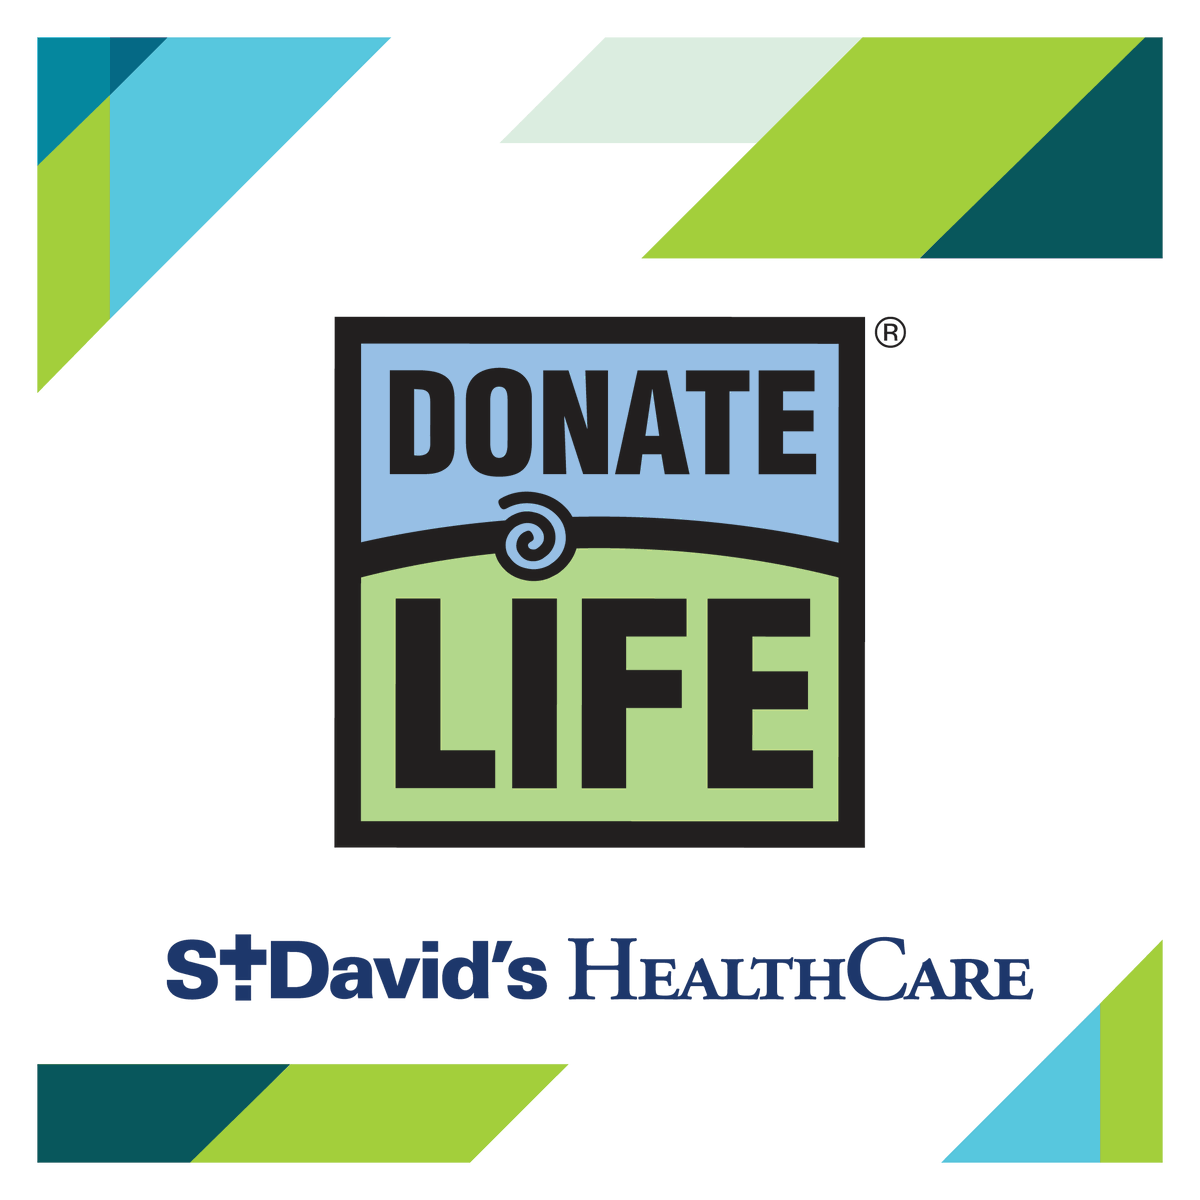 #DYK that: - More than 100,000 people are waiting for lifesaving organ transplants - 86% of patients waiting are in need of a kidney - In 2023, 6,953 more lives were saved because of living donors To learn about our kidney transplant program, visit: stdavids.com/specialties/ki…